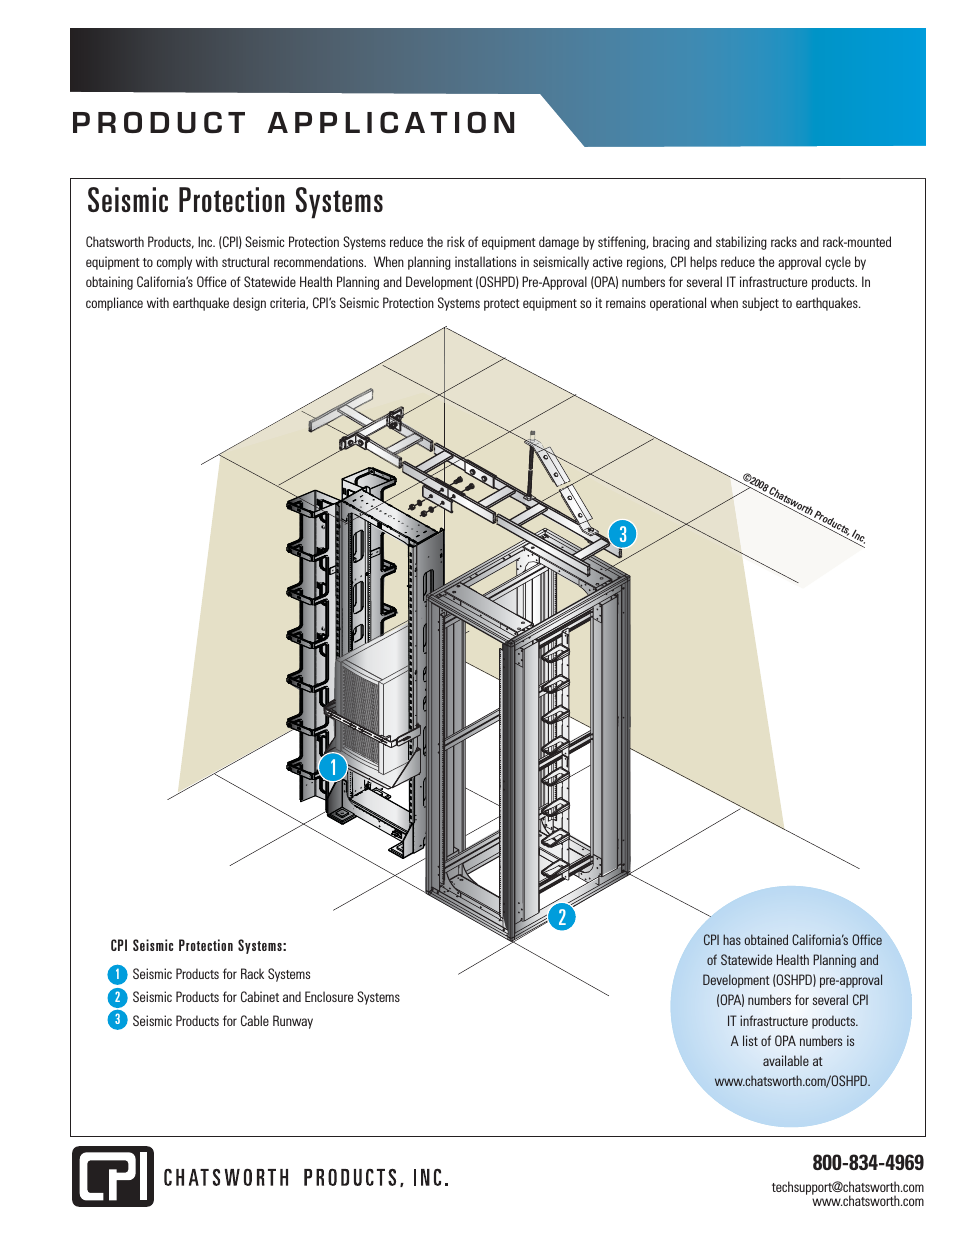 Seismic Protection Systems